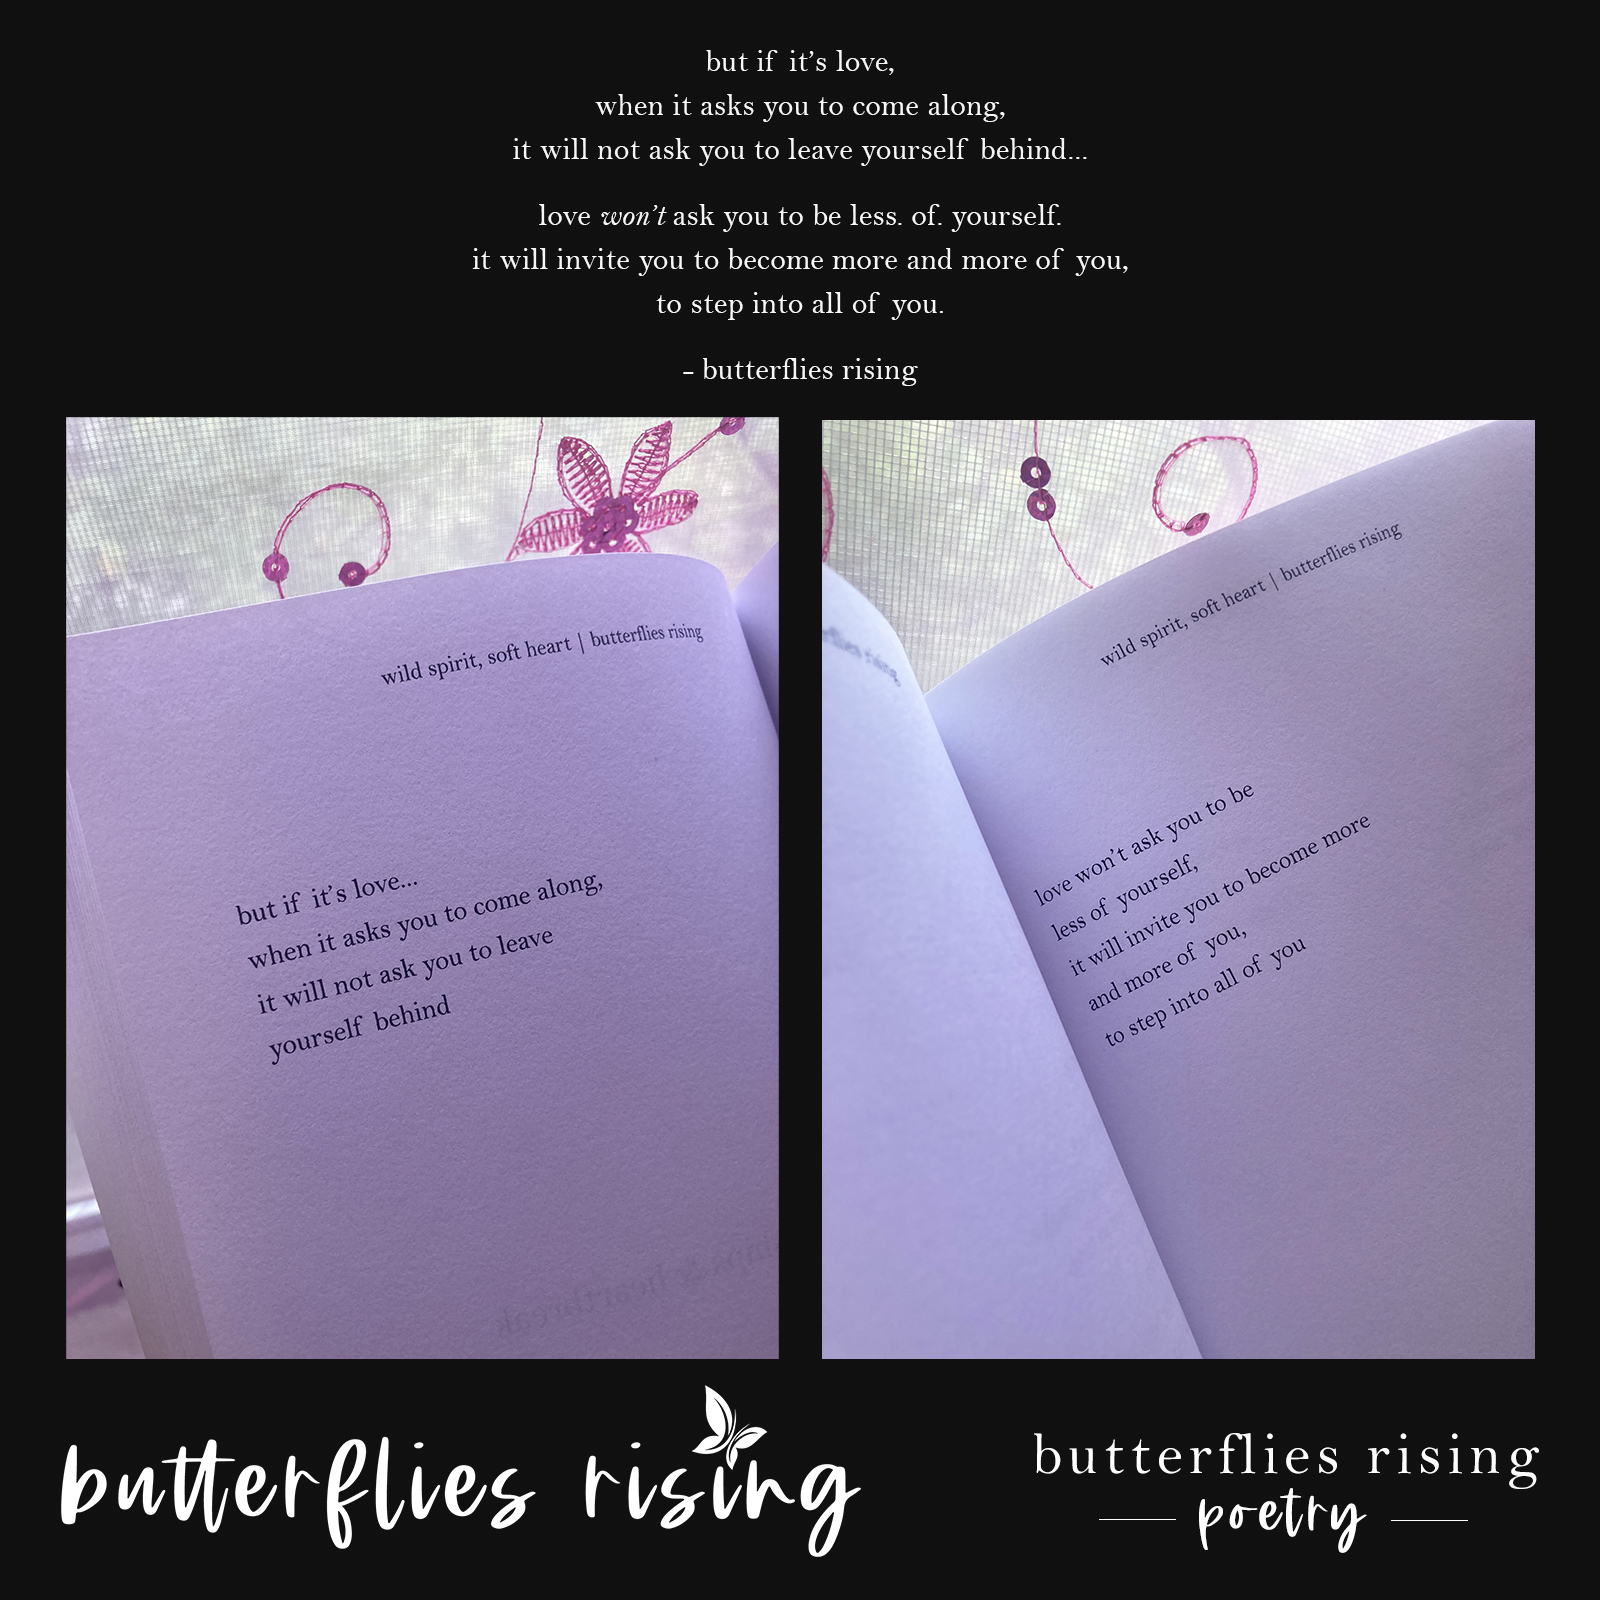 but if it’s love... when it asks you to come along - butterflies rising